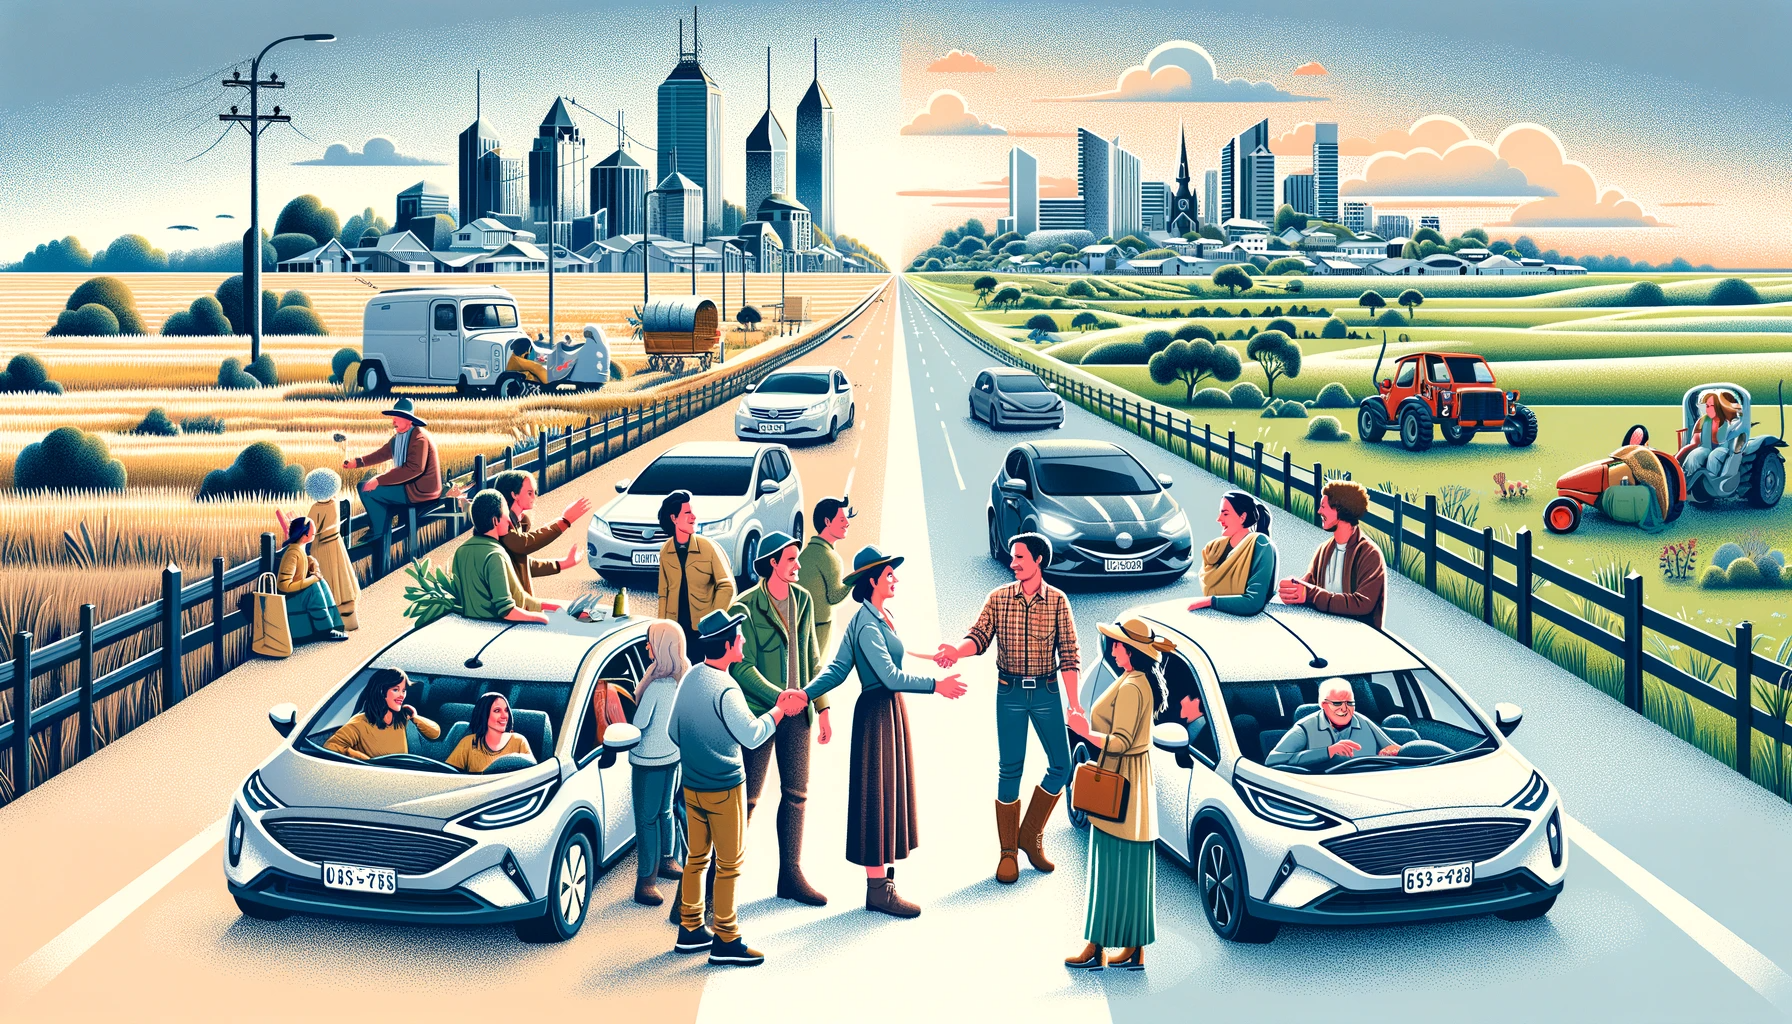 Cover for article called "Carpooling Culture in Australia: Building Community Through Shared Rides"